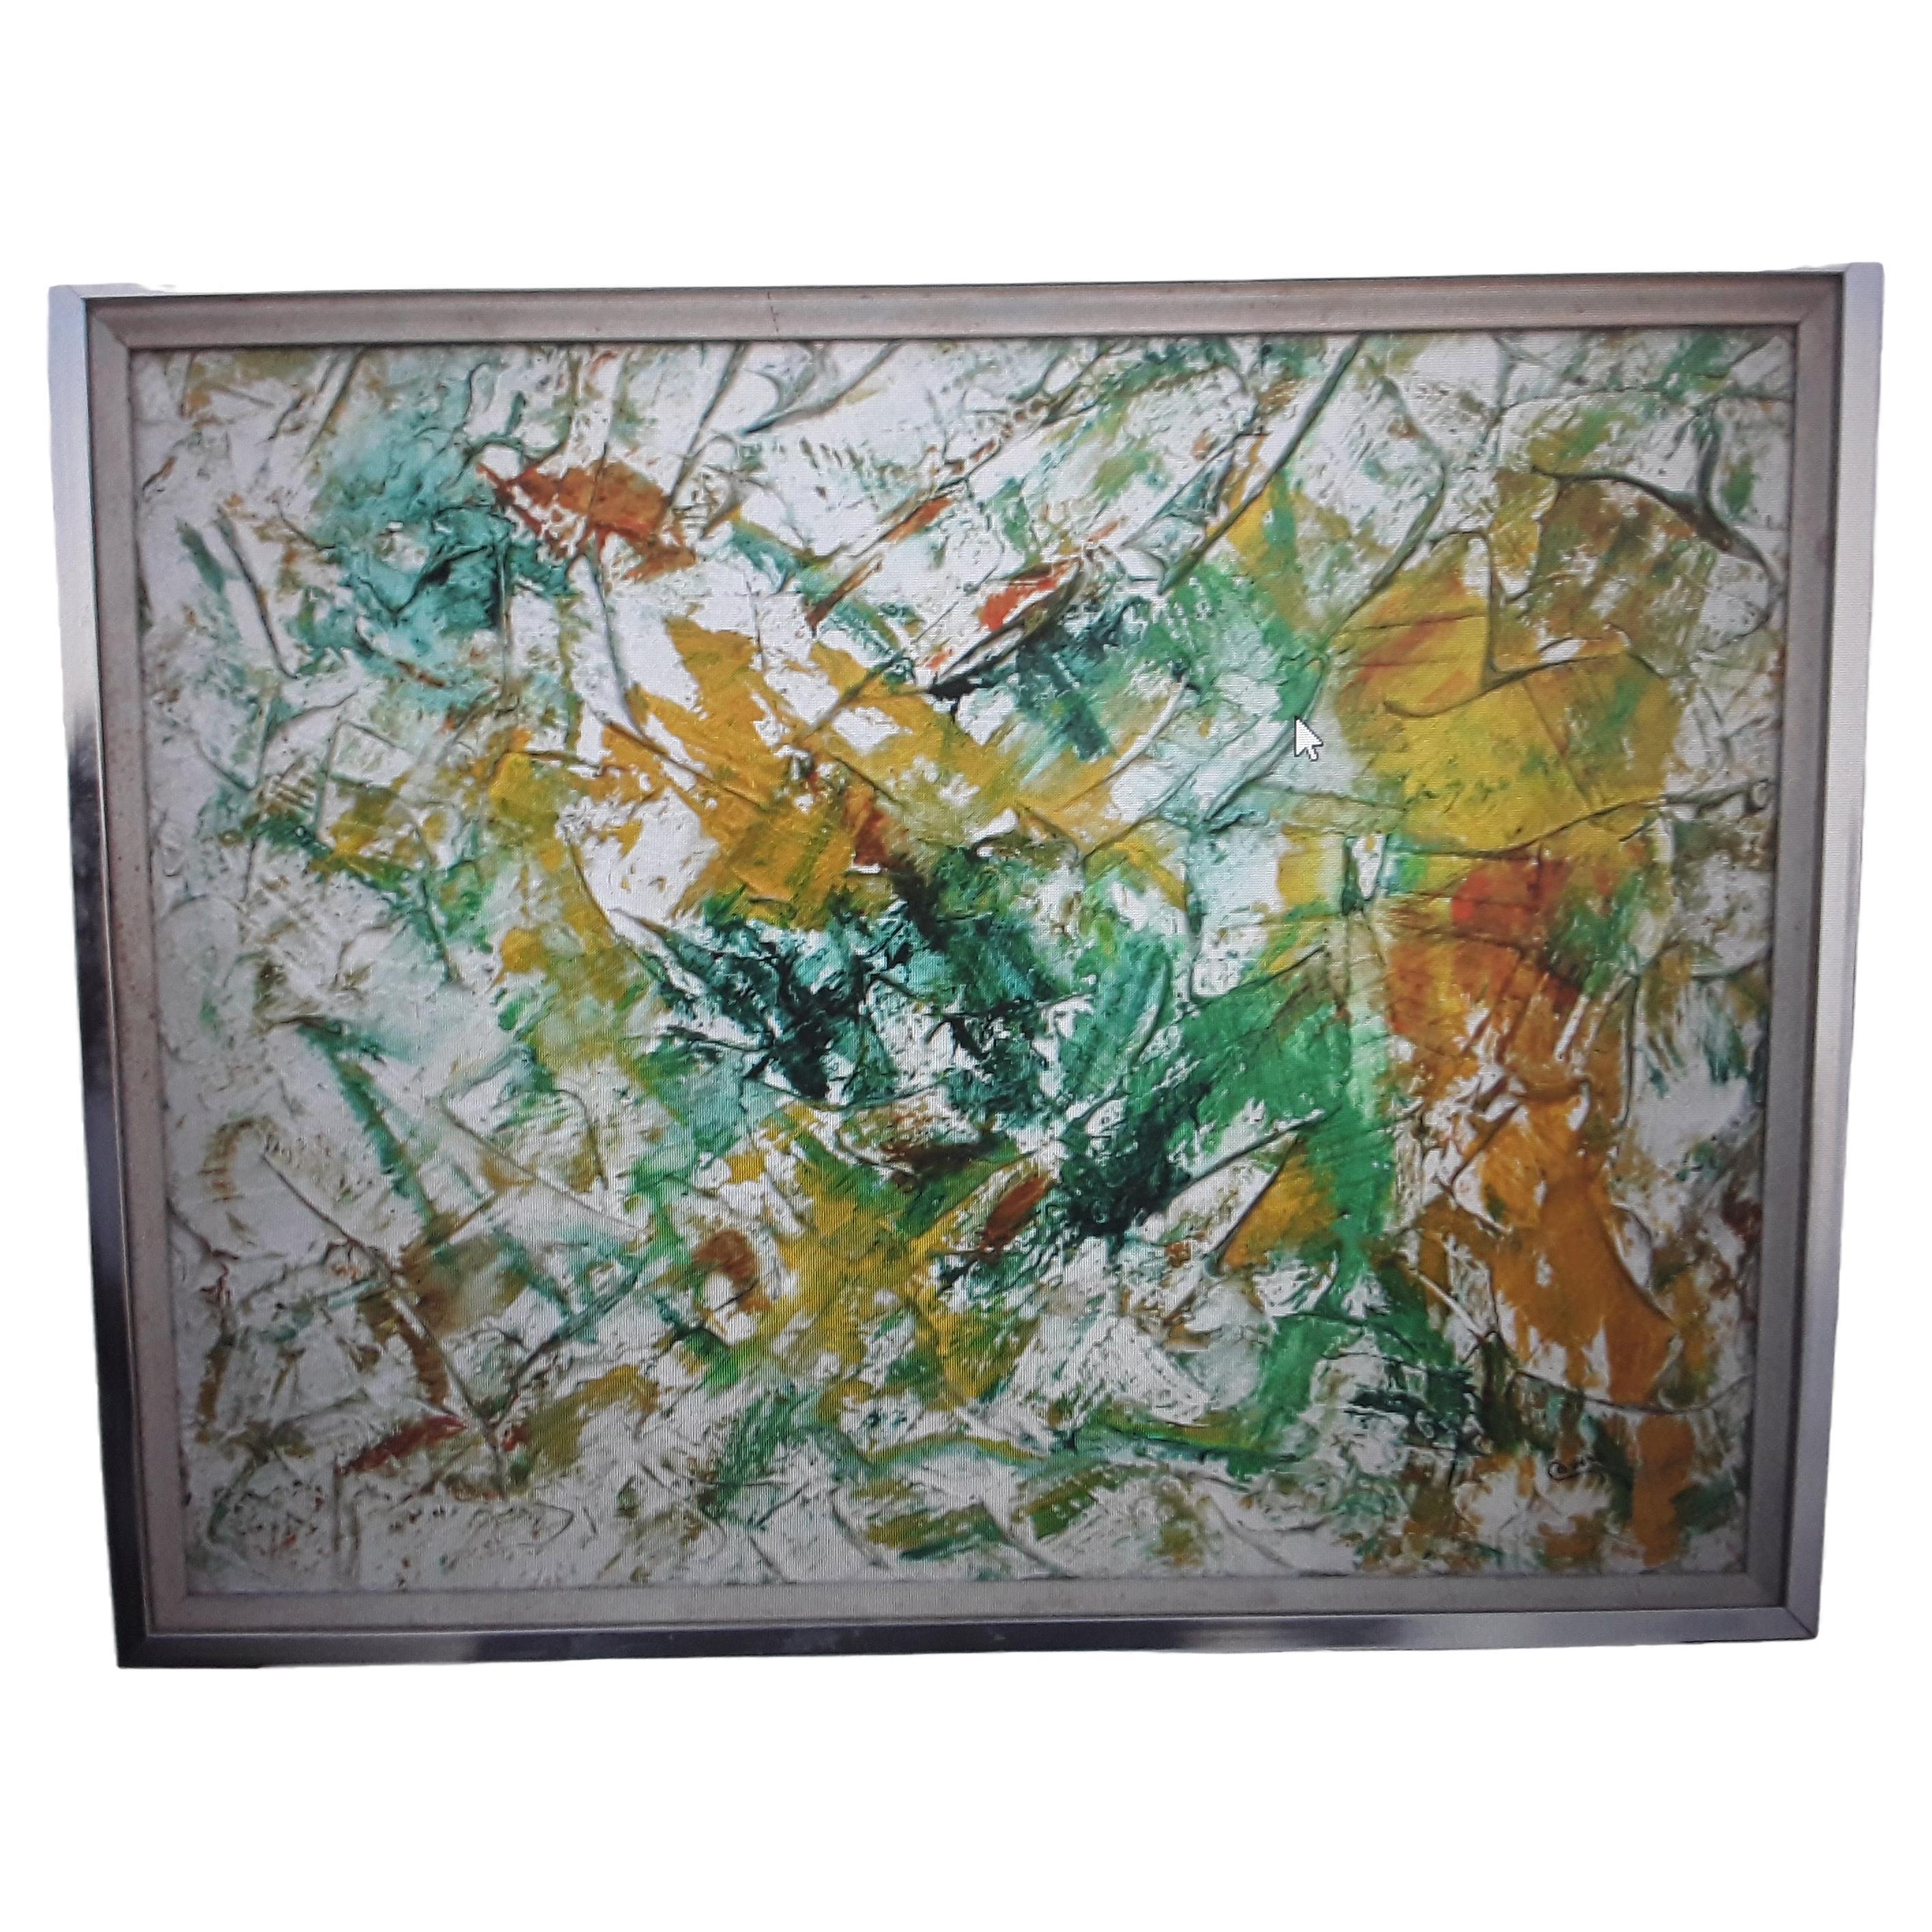 1970's Modern Multi Colored Abstract Oil Painting Framed and Signed "Cowan"